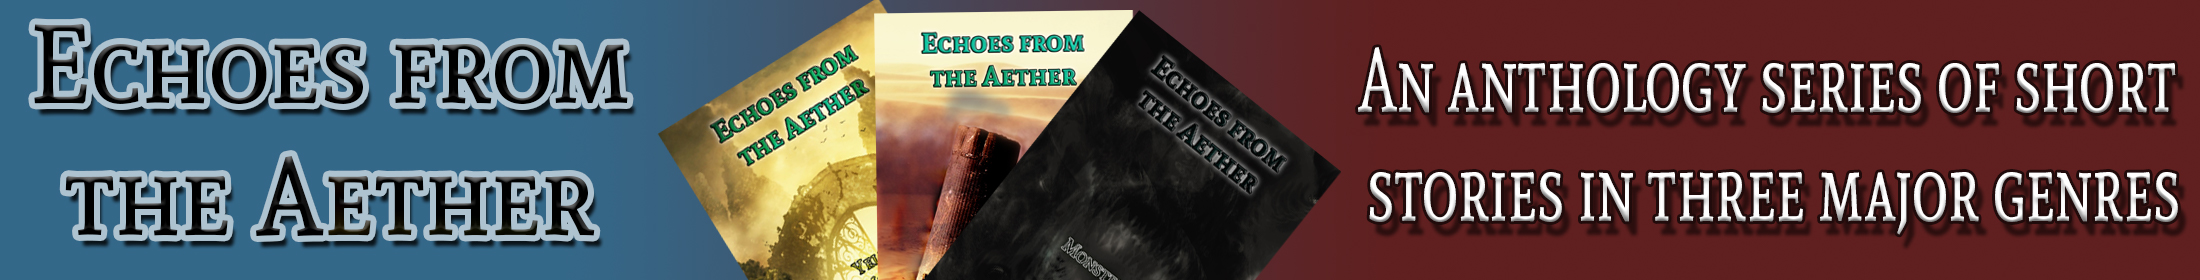 Echoes from the Aether Anthology Series [BUNDLE]